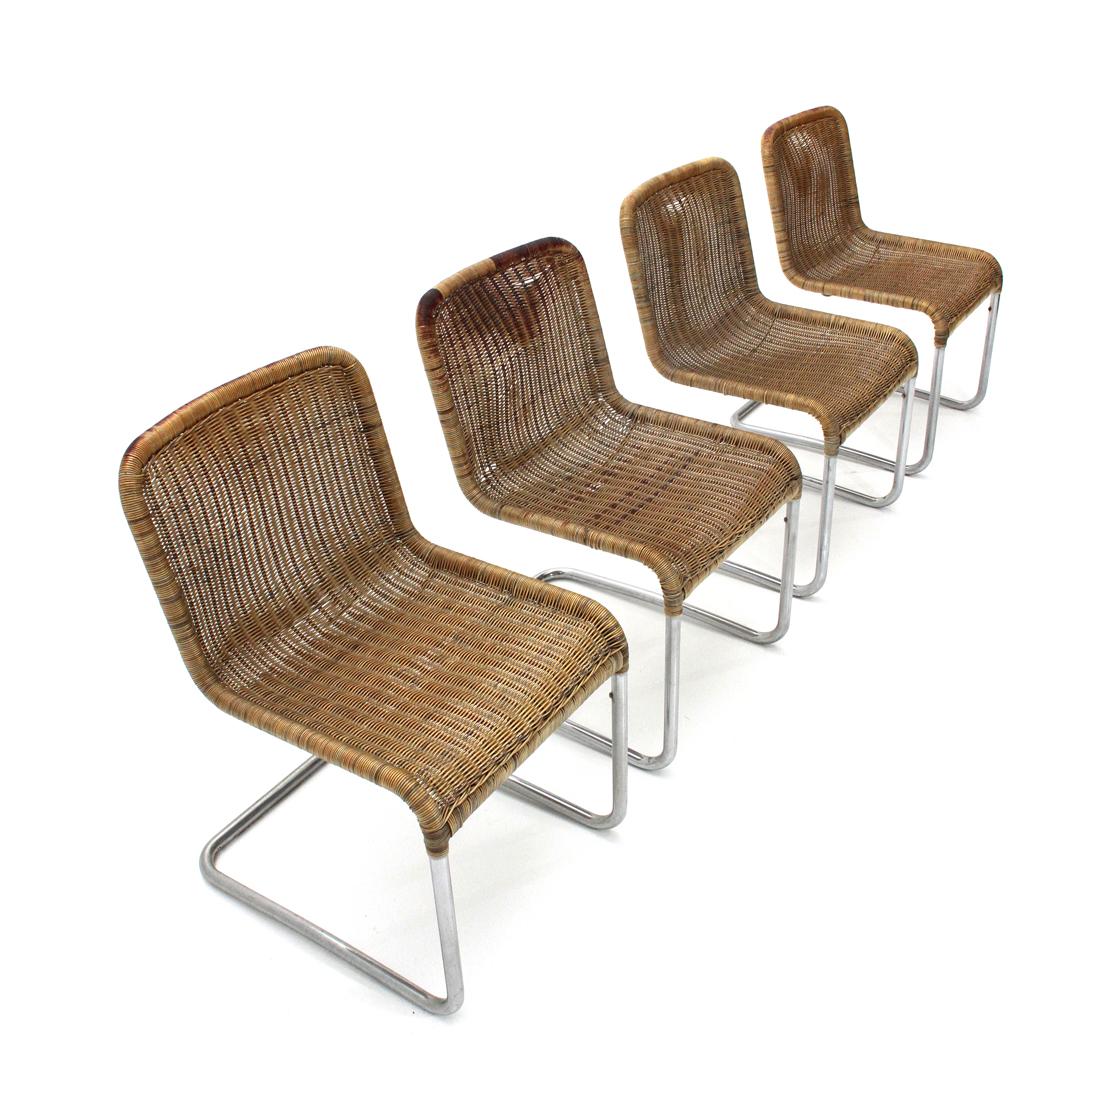 Set of four Italian manufacturing chairs produced in the 1970s.
Tubular structure in curved and chromed metal.
Seat and back in woven plastic thread.
Structure in good condition, some signs due to normal use over time, plastic wire hardened in